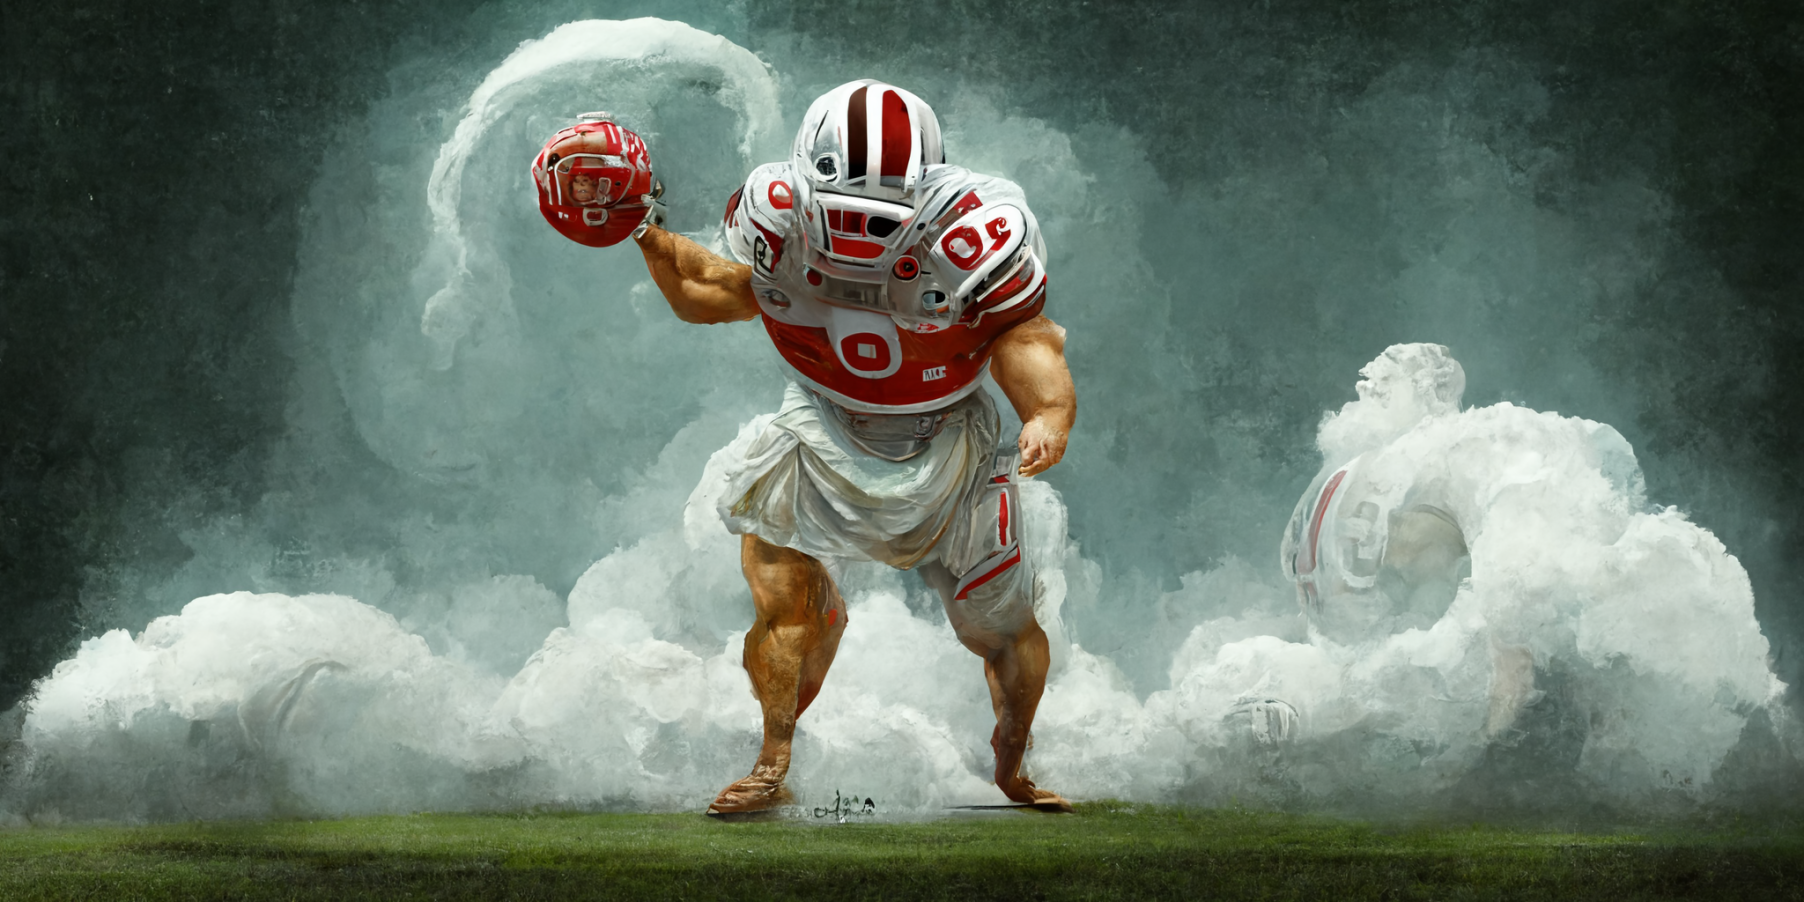 Hercules is playing football for ohio state.